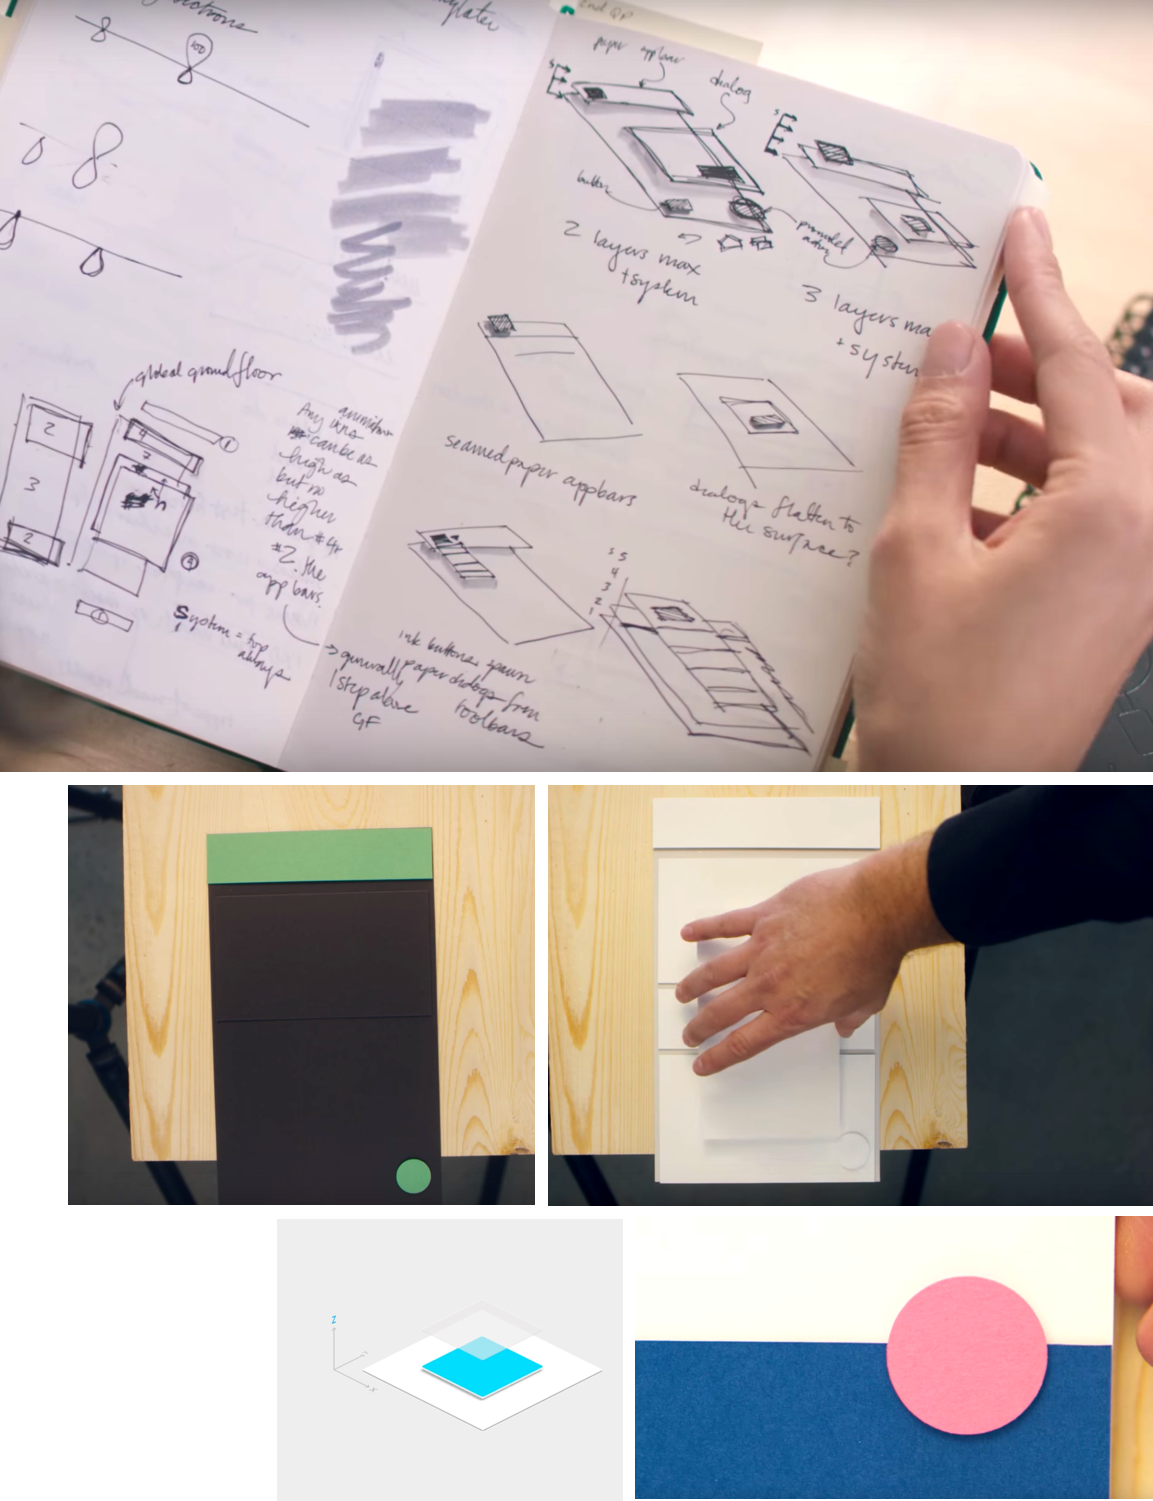 Google Material Design - inspiration from physical